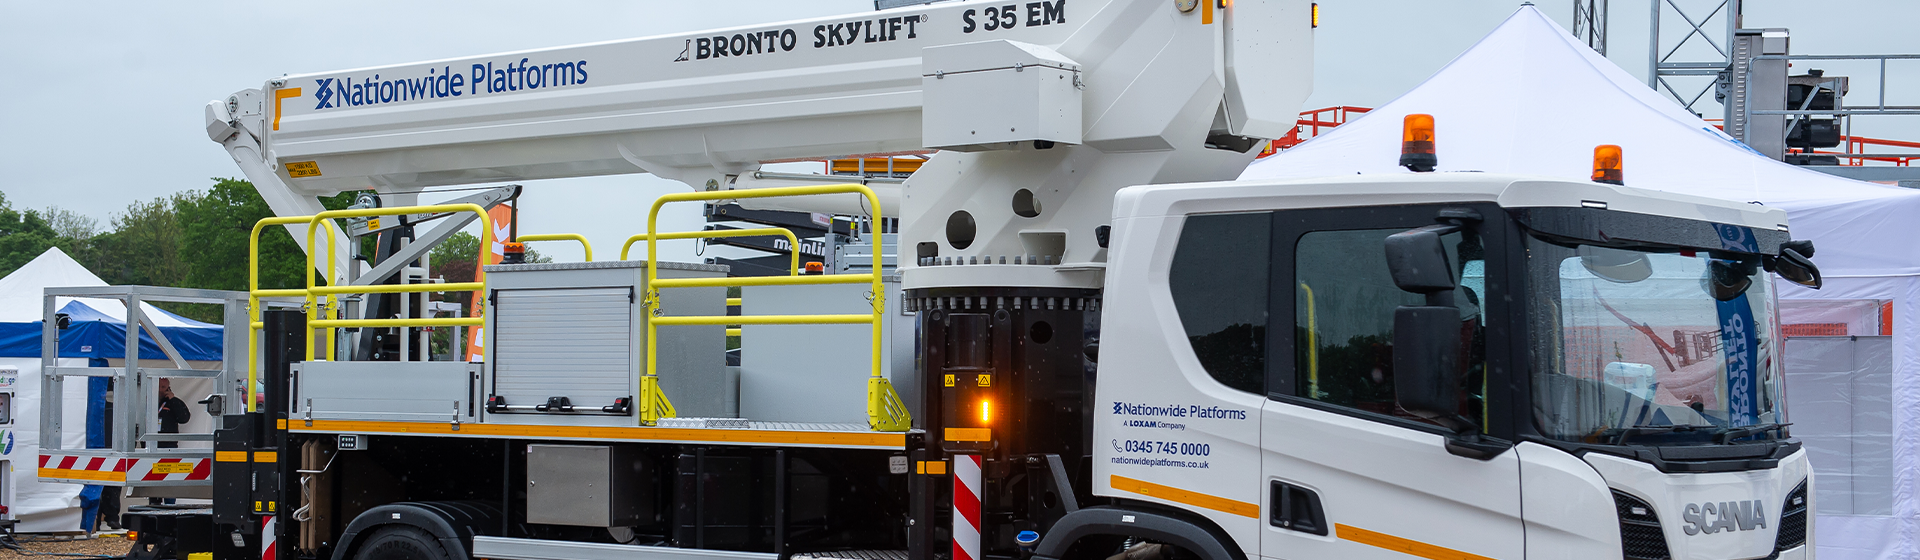 Powered access hire leaders reach new heights with Bronto Skylift